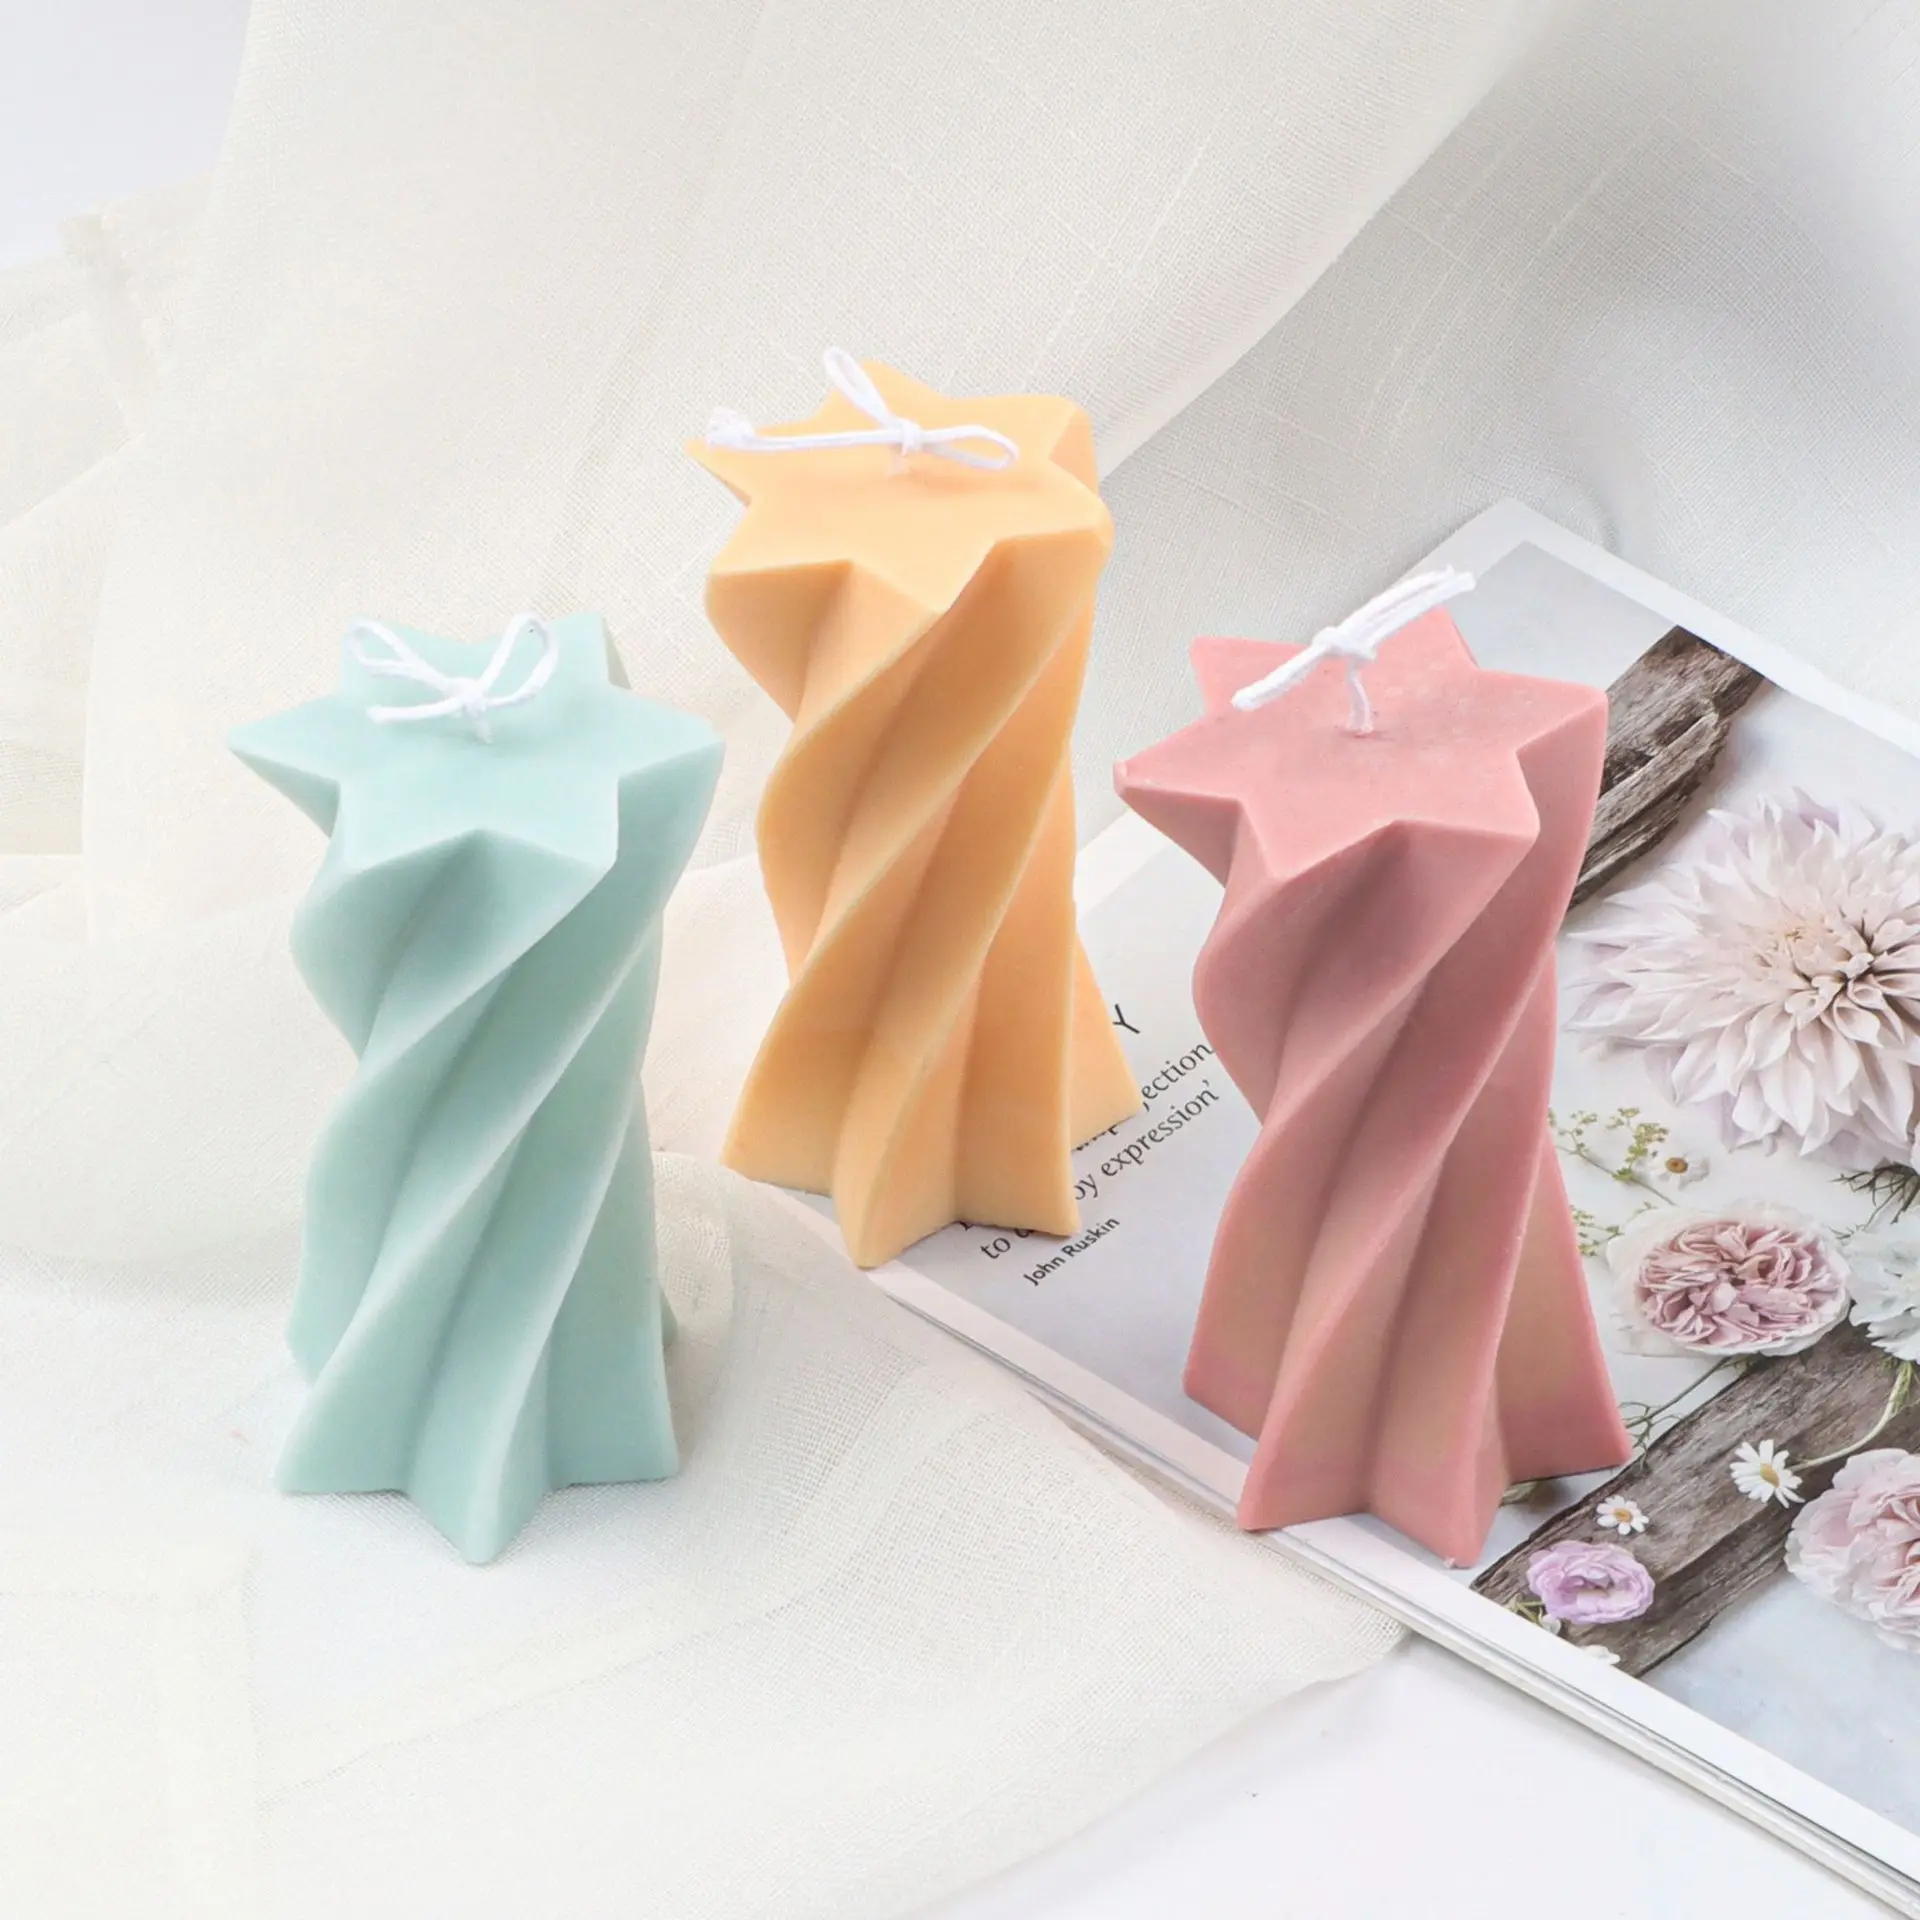 

3D Six-pointed Star Flower Candle Silicone Molds Romantic Abstract Object Strip Curved Unique Abstract Pillar Wax Candles Molds